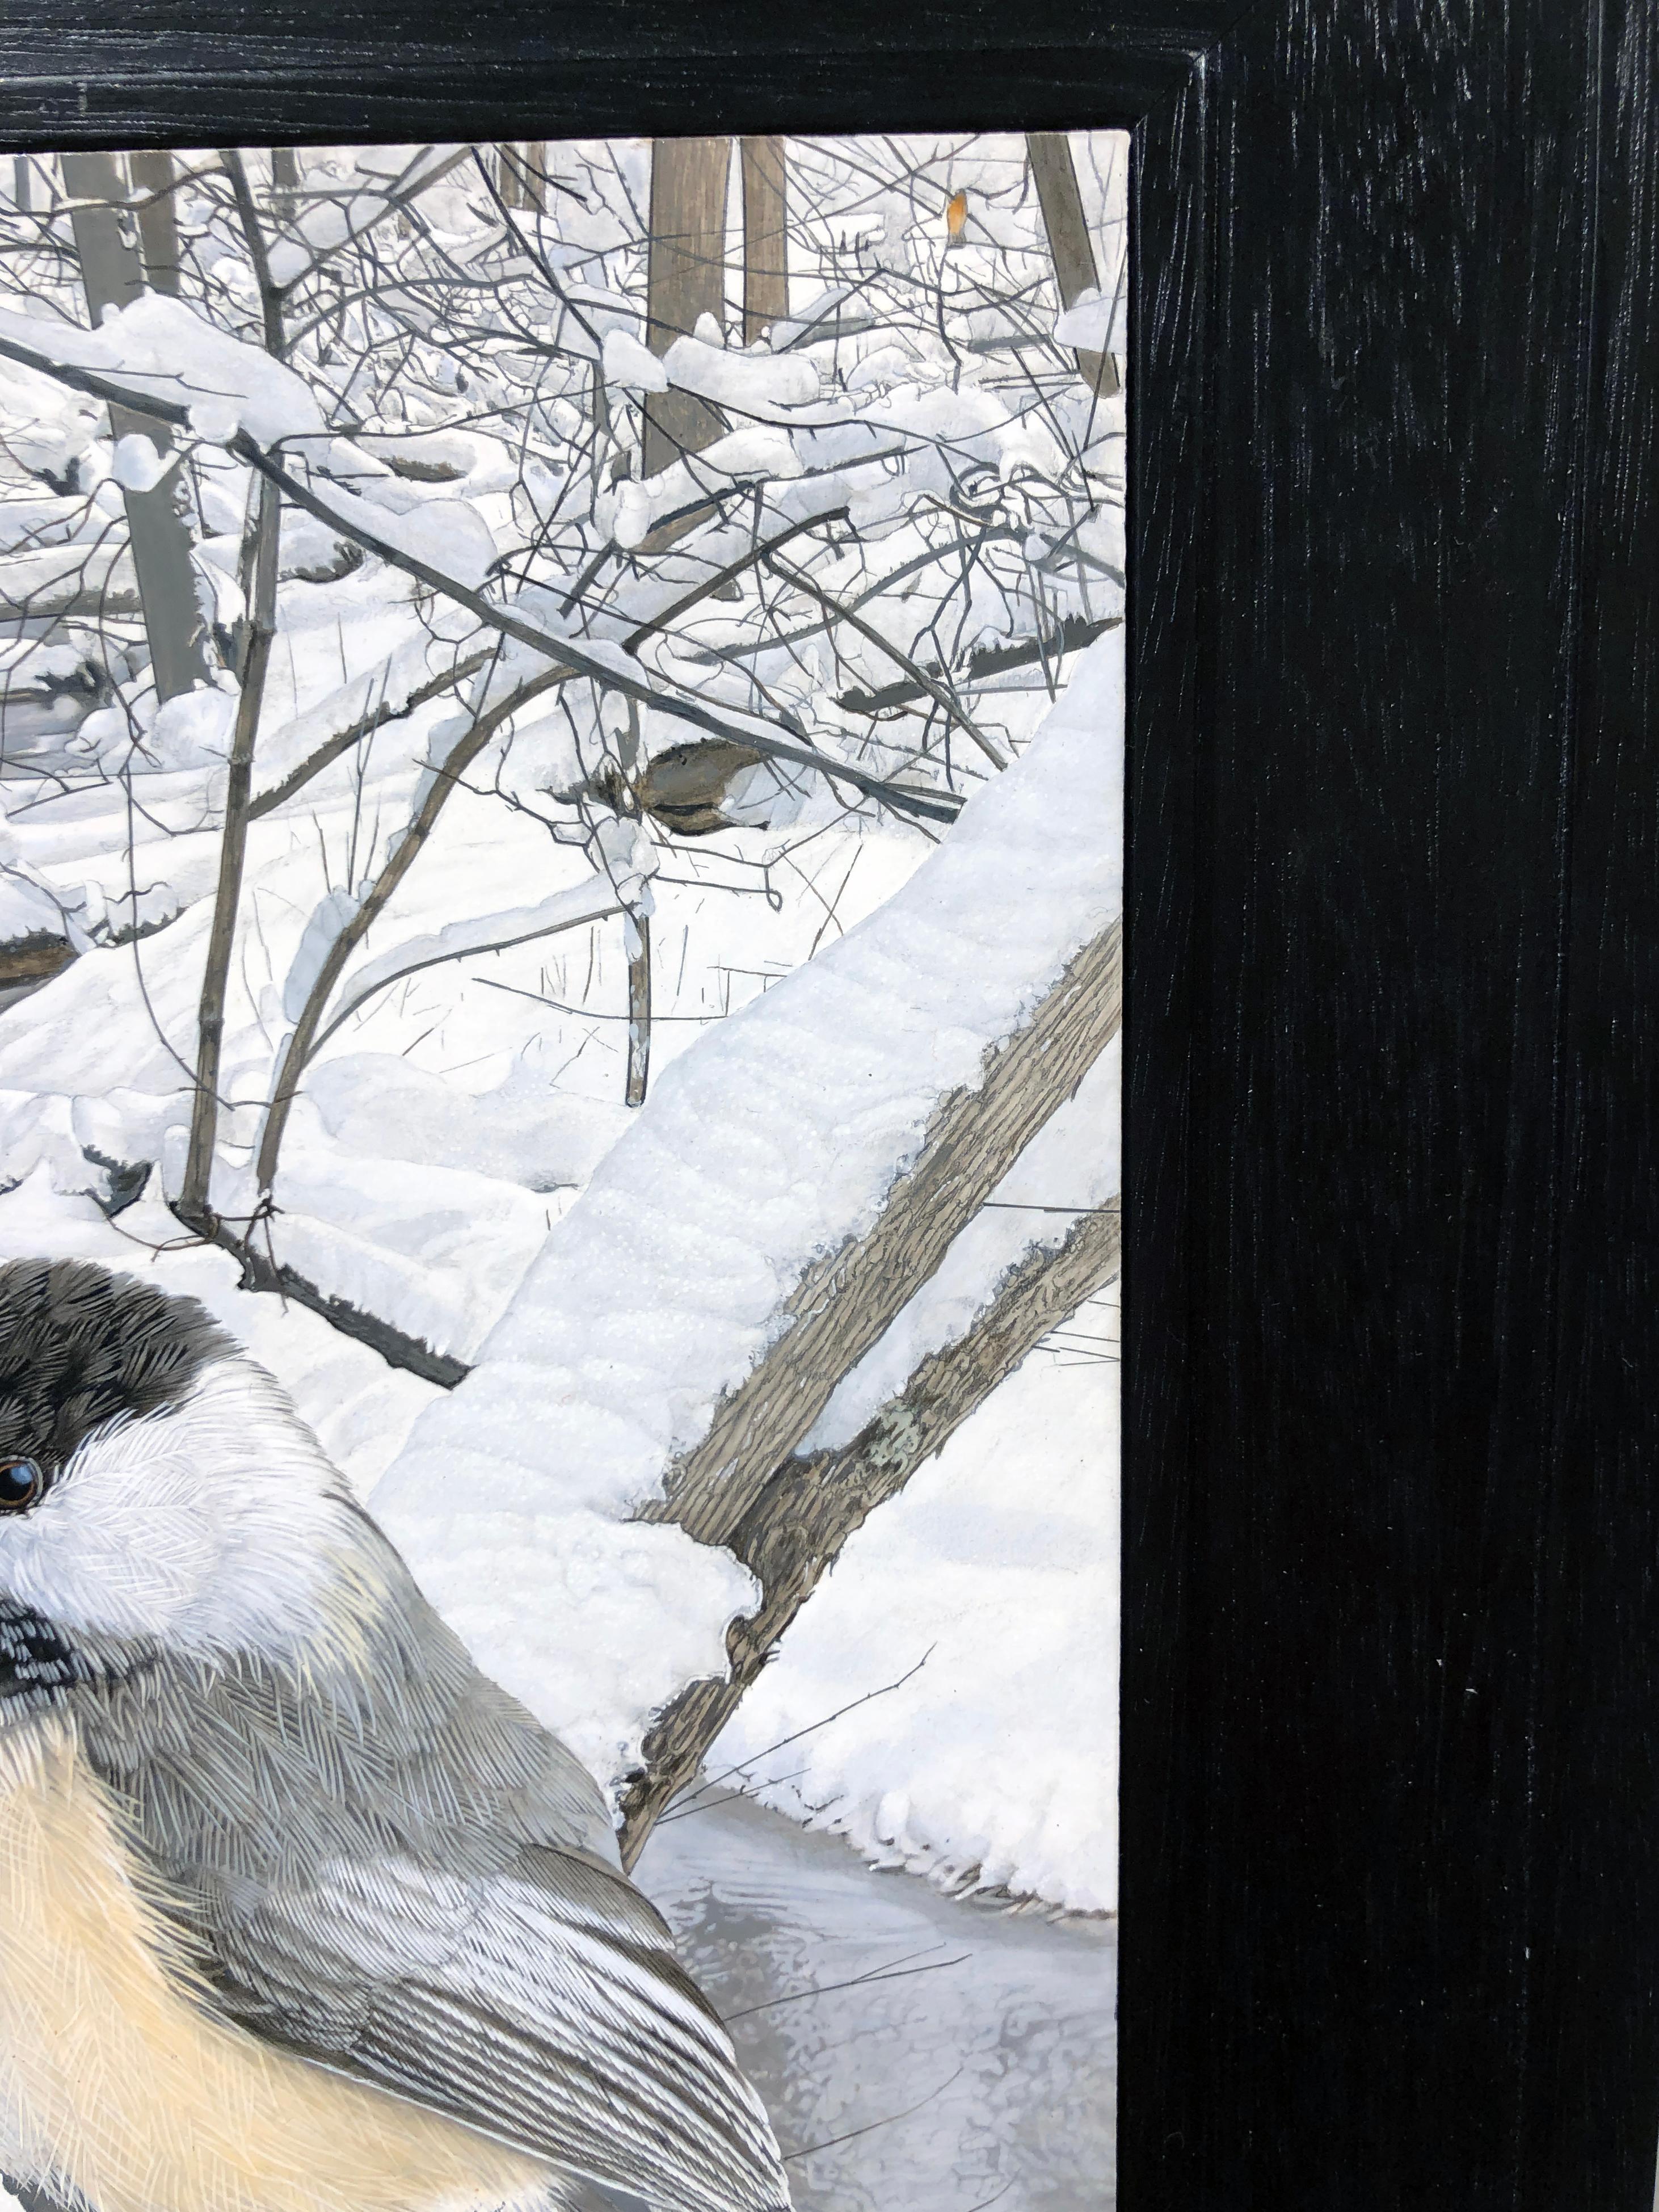 Though small in scale this painting delivers great impact.  Every detail is captured in meticulous brush work.  

Rick Pas
Chickadee at Hasler Creek
acrylic on panel
12h x 12w in
30.48h x 30.48w cm

ARTIST'S STATEMENT
Creating is an addiction. With